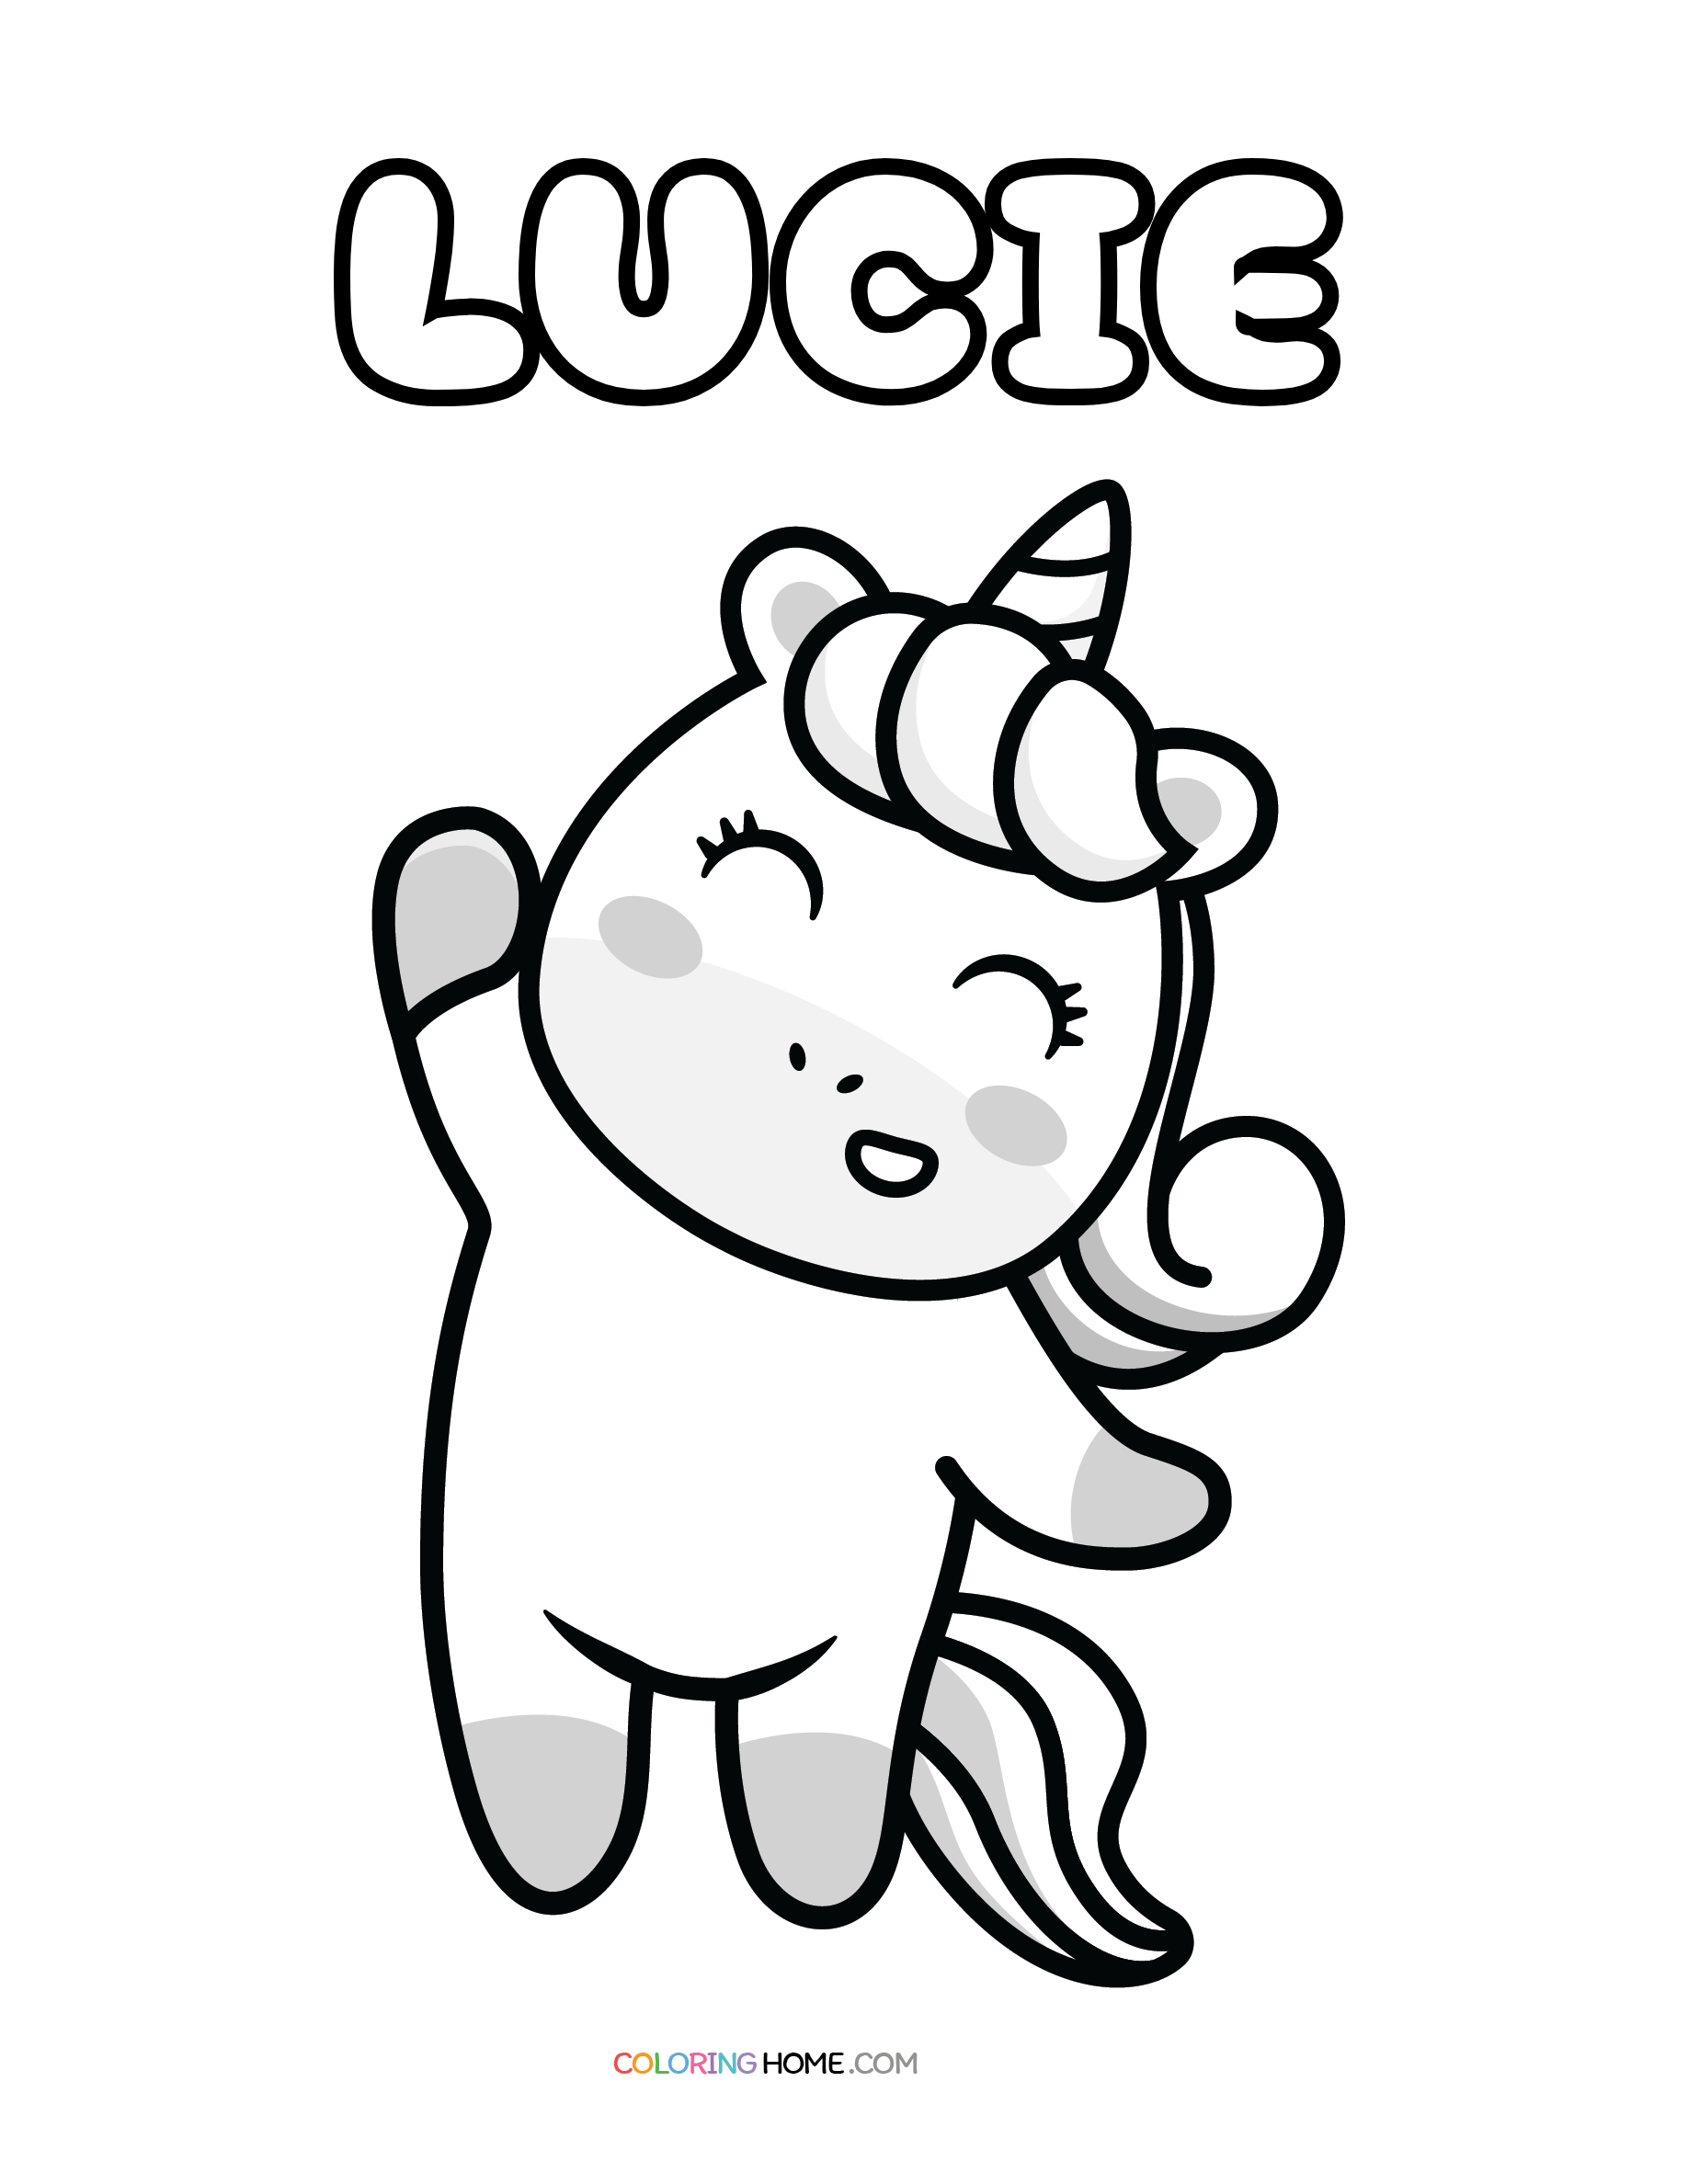 Lucie unicorn coloring page